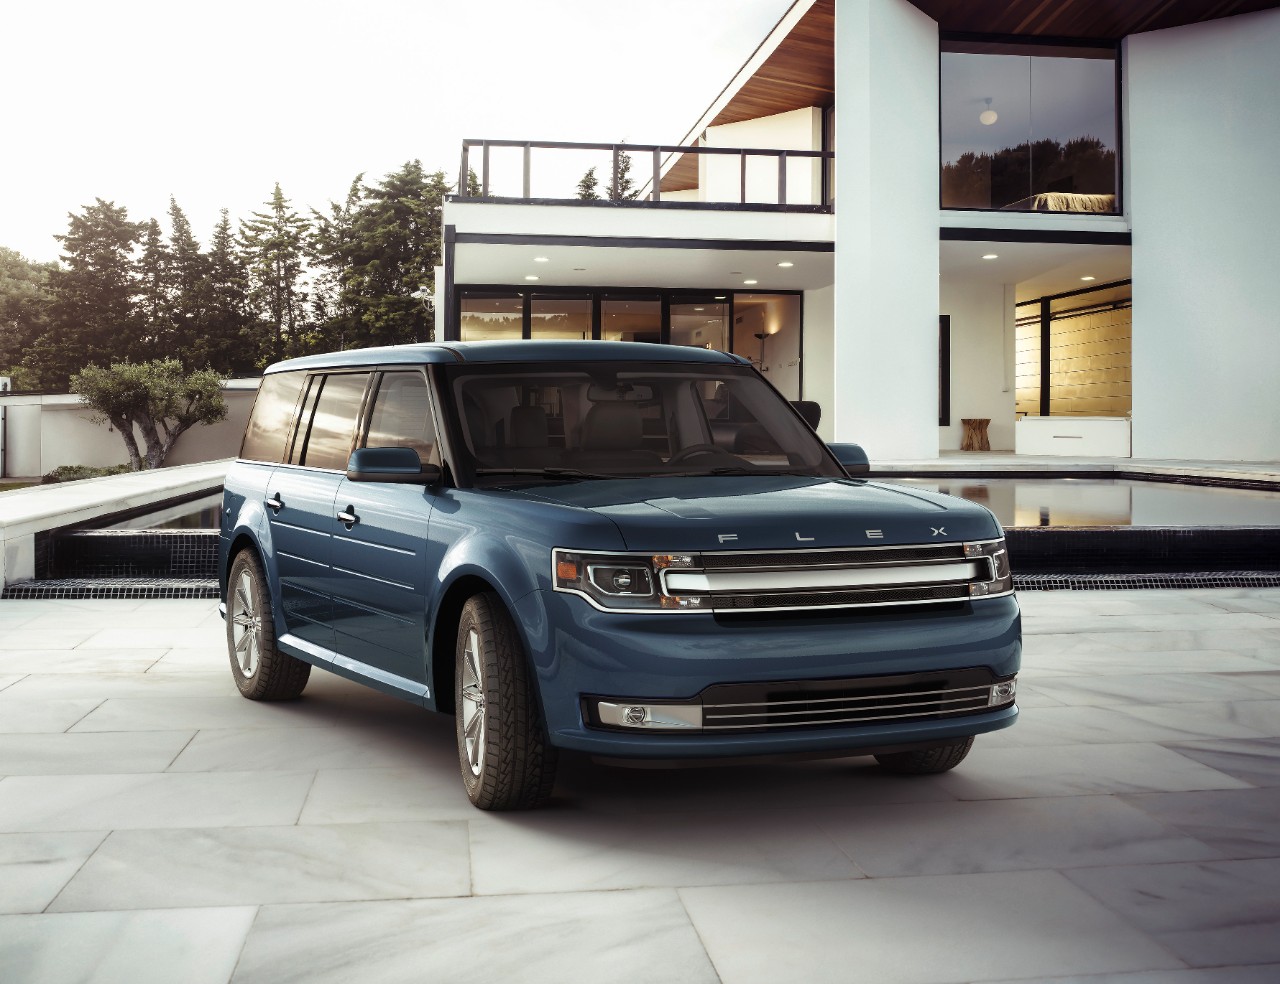 2017 Ford Flex Review, Ratings, Specs, Prices, and Photos - The Car